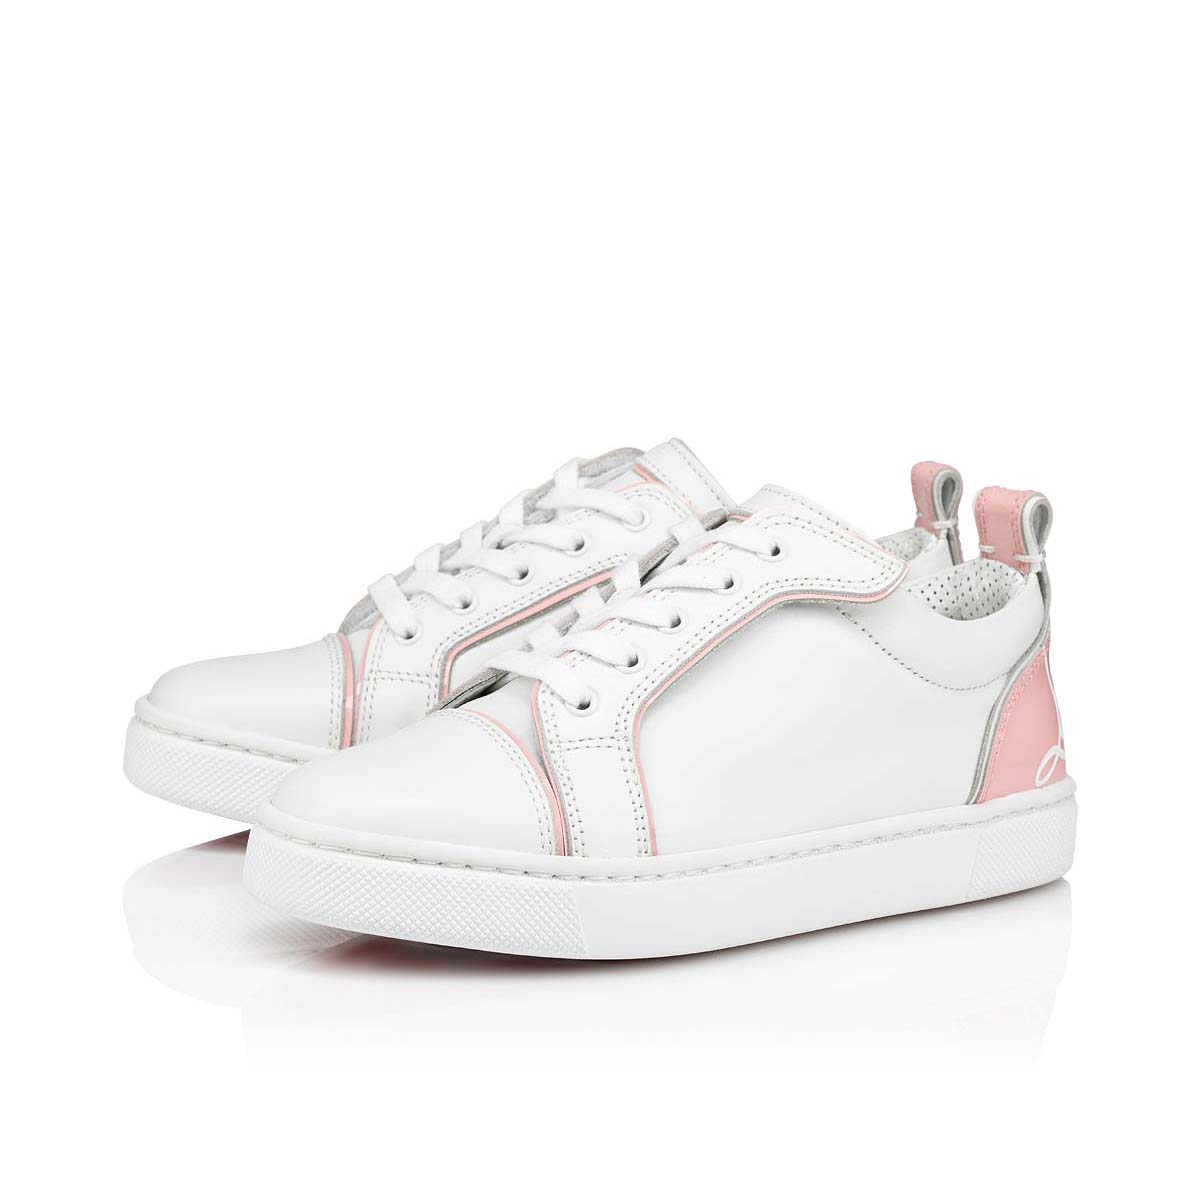 Funnyto - Low-top sneakers - Calf leather - Rosy - Kids - Christian ...